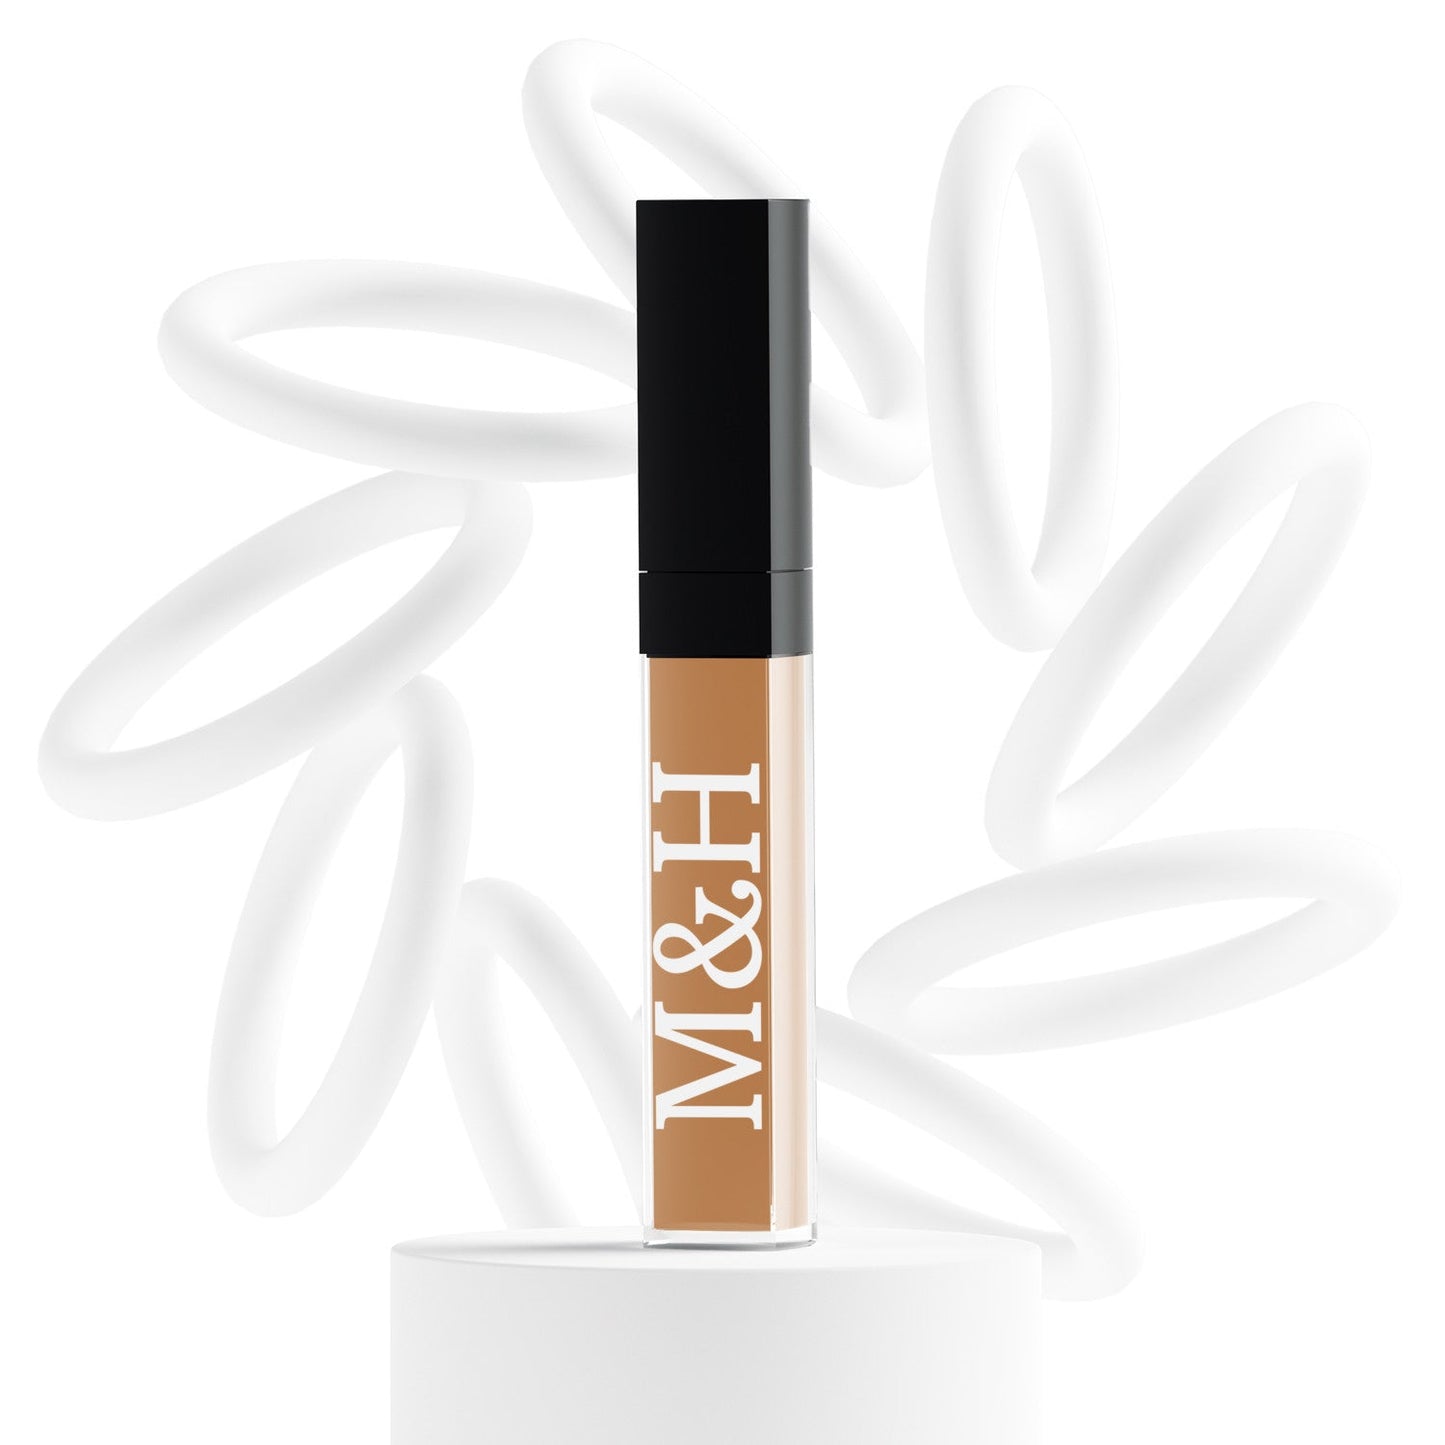 Vegan Concealers - M&H FashionVegan ConcealersconcealerM&H FashionM&H FashionConcealer-905MochaVegan ConcealersM&H FashionconcealerM&H Fashion This multifunctional concealer is designed to cover under-eye circles, complexion alterations, and major imperfections like scars, hyperpigmentation, burns, and tatVegan Concealers